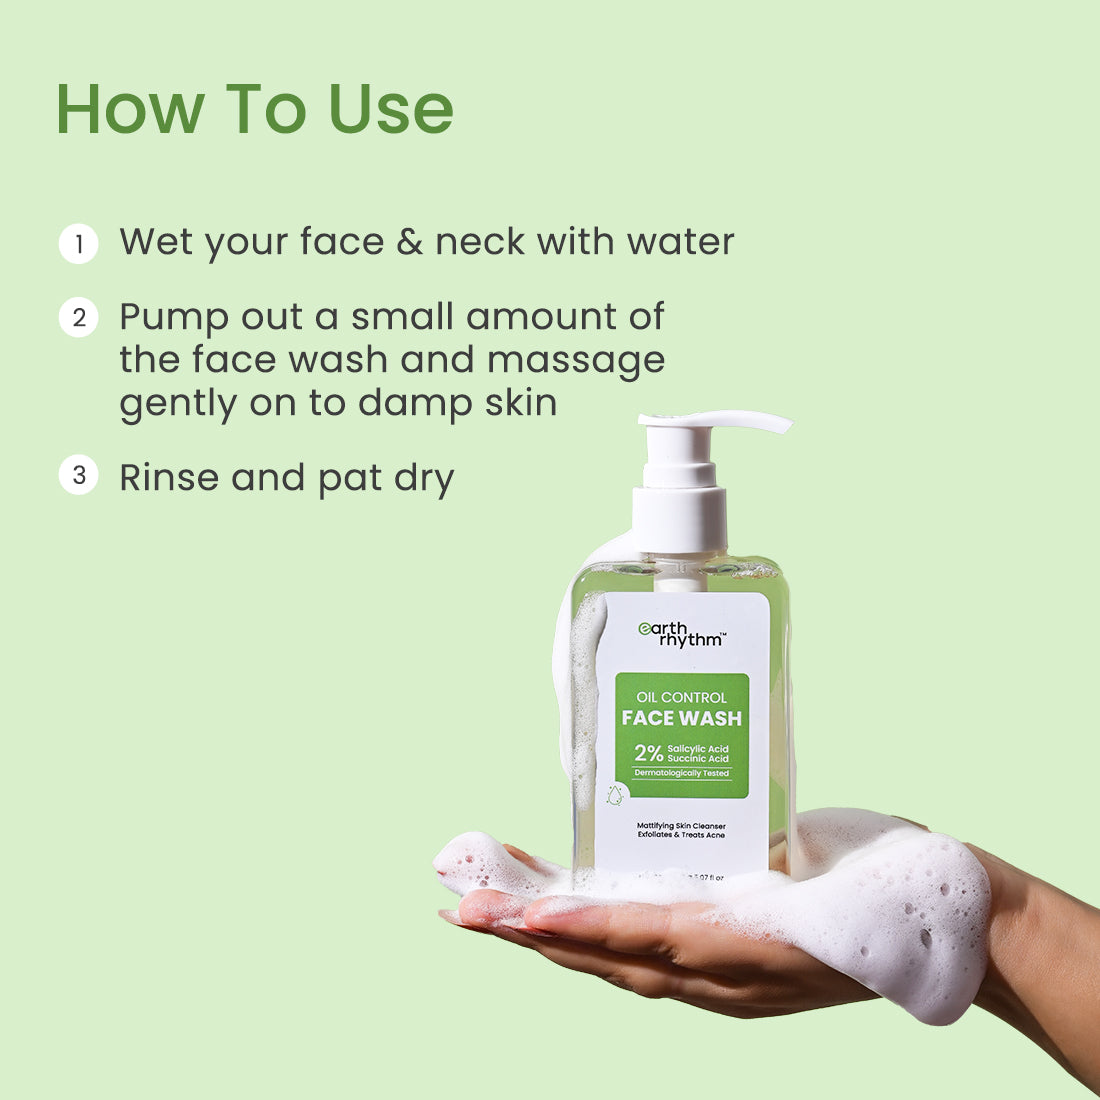 How to use oil control face wash